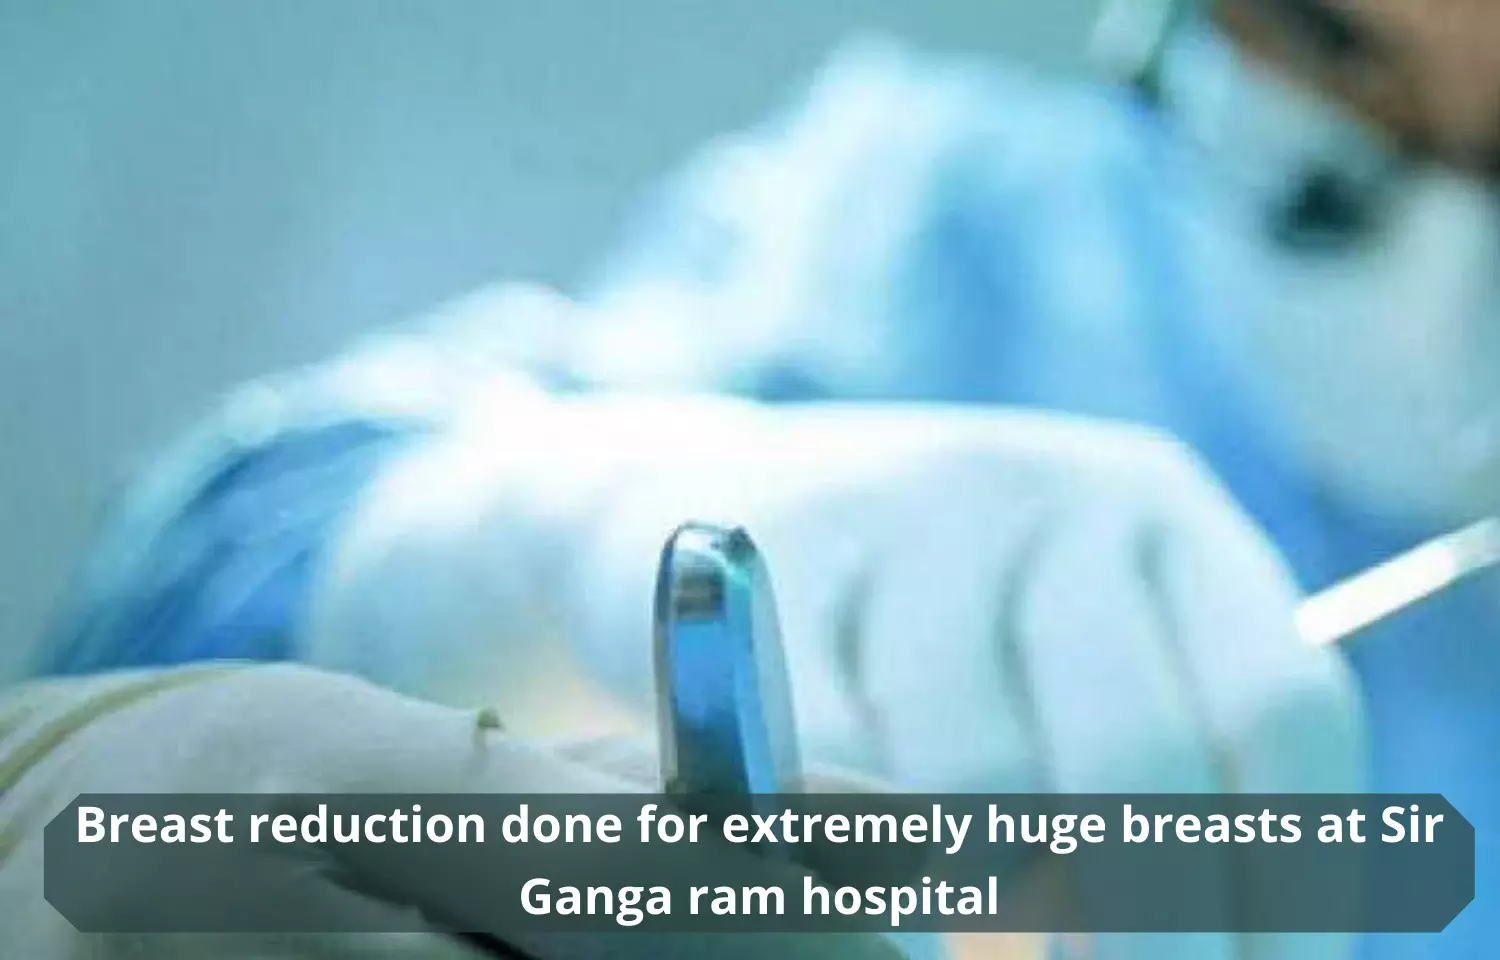 Breast reduction successful for extremely huge breasts at Sir Ganga ram hospital